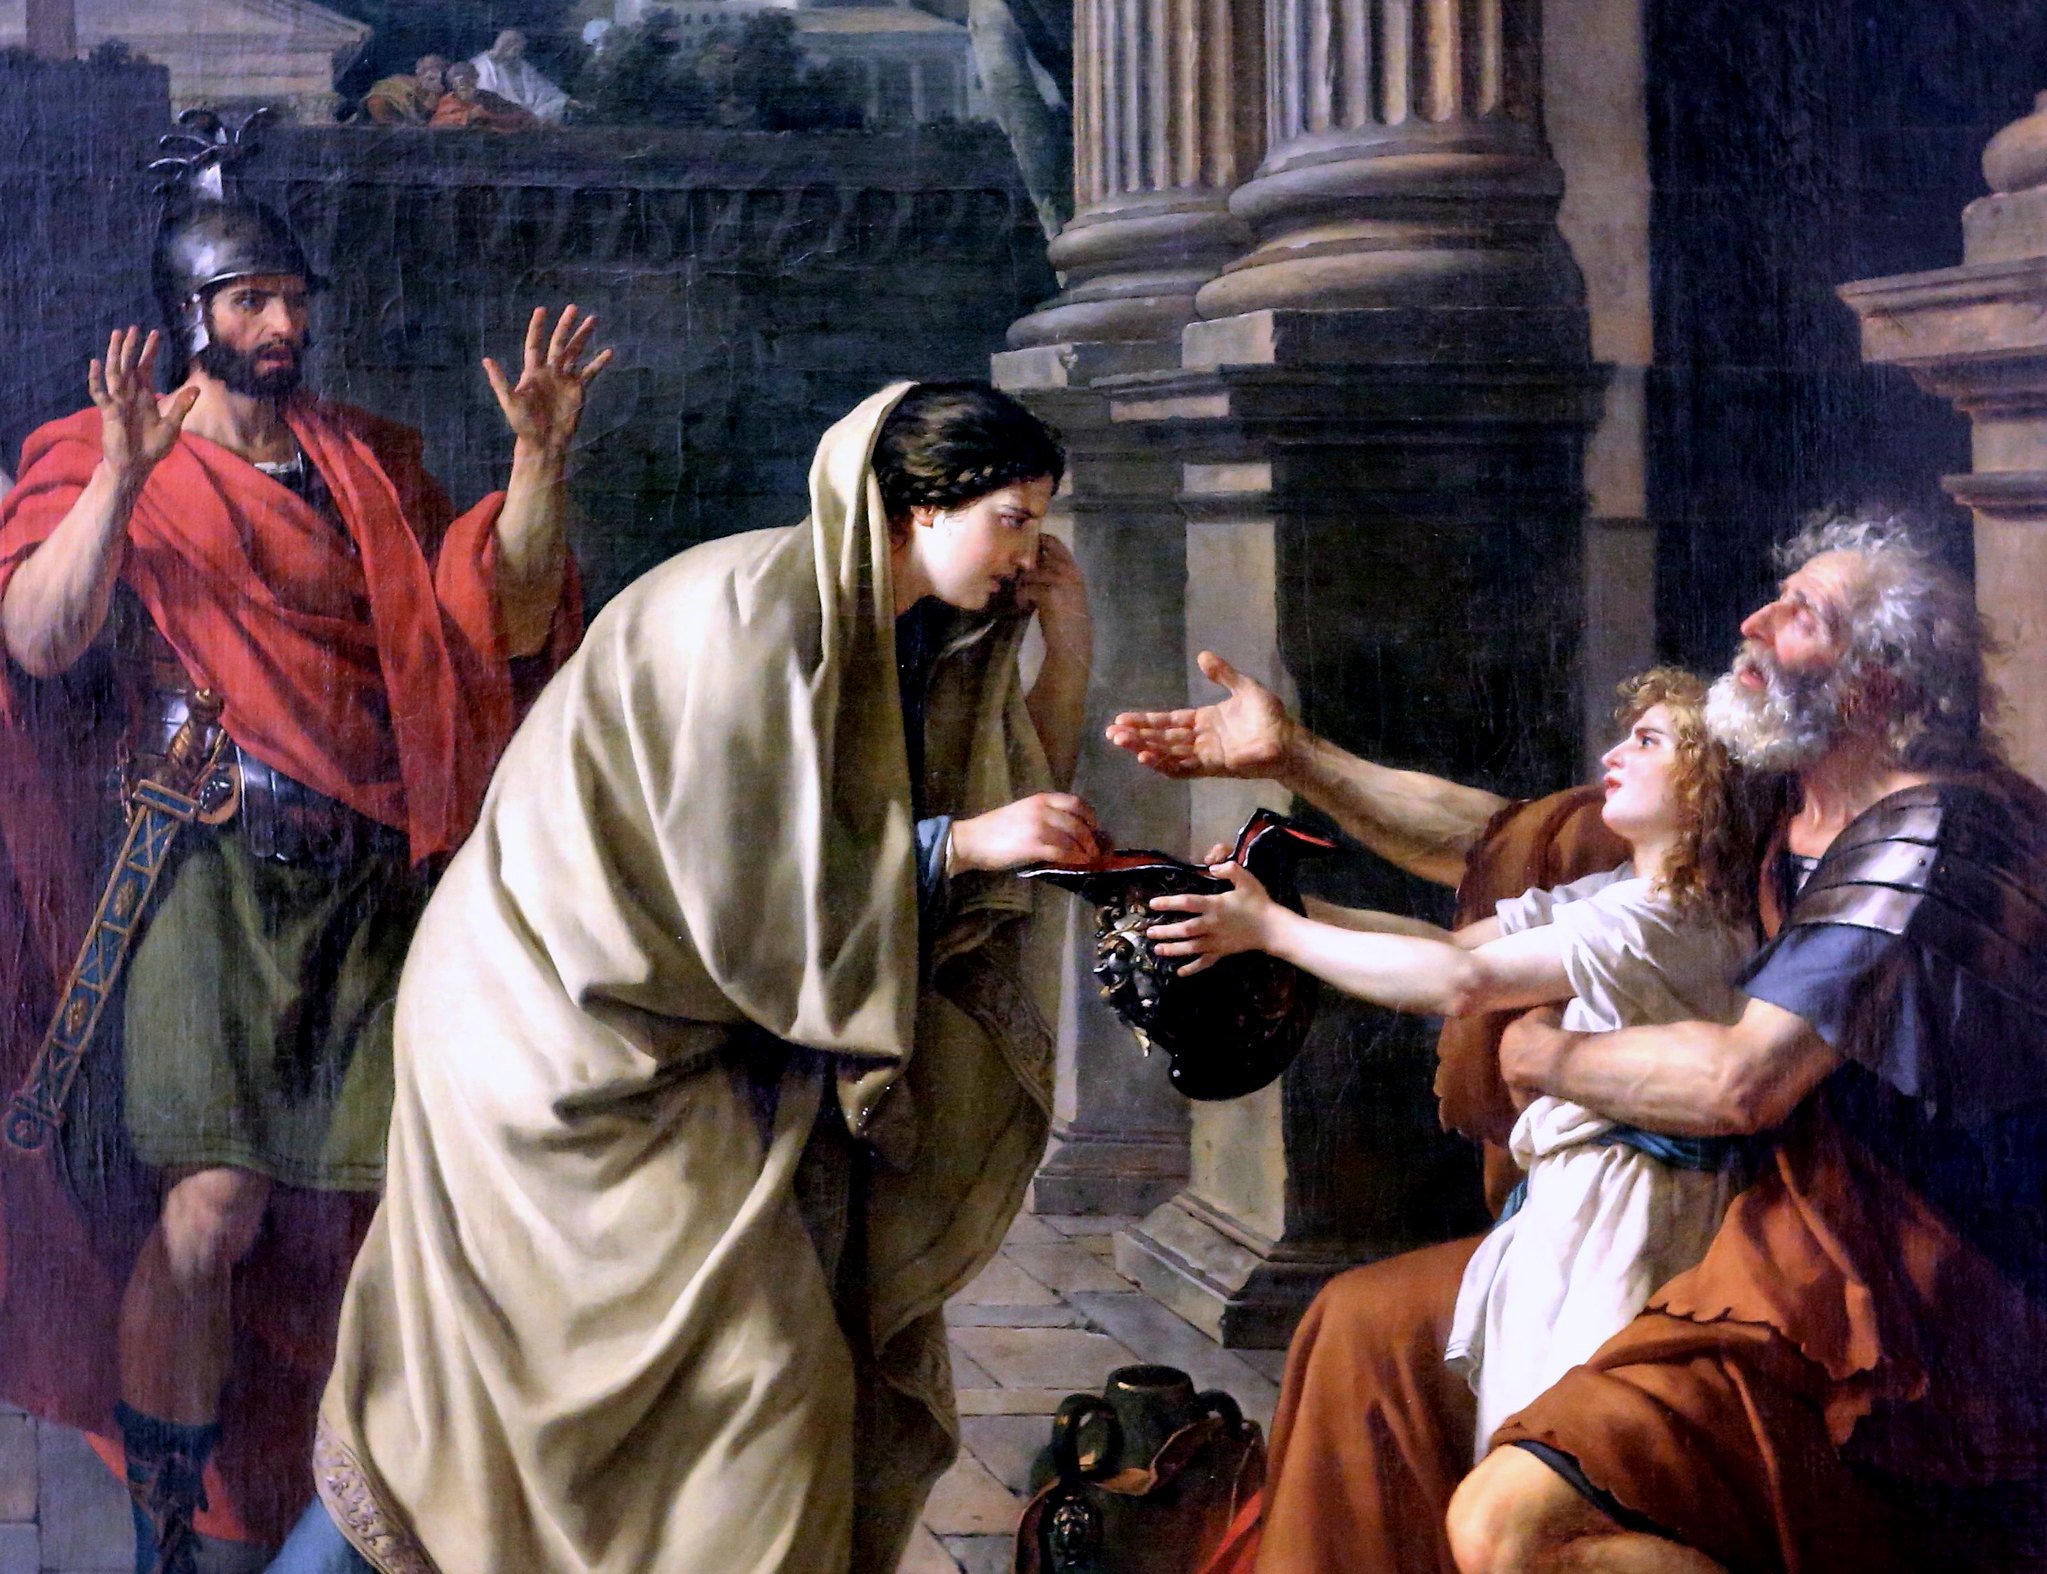 Belisarius begging for Alms, painted by Jacques-Louis David.